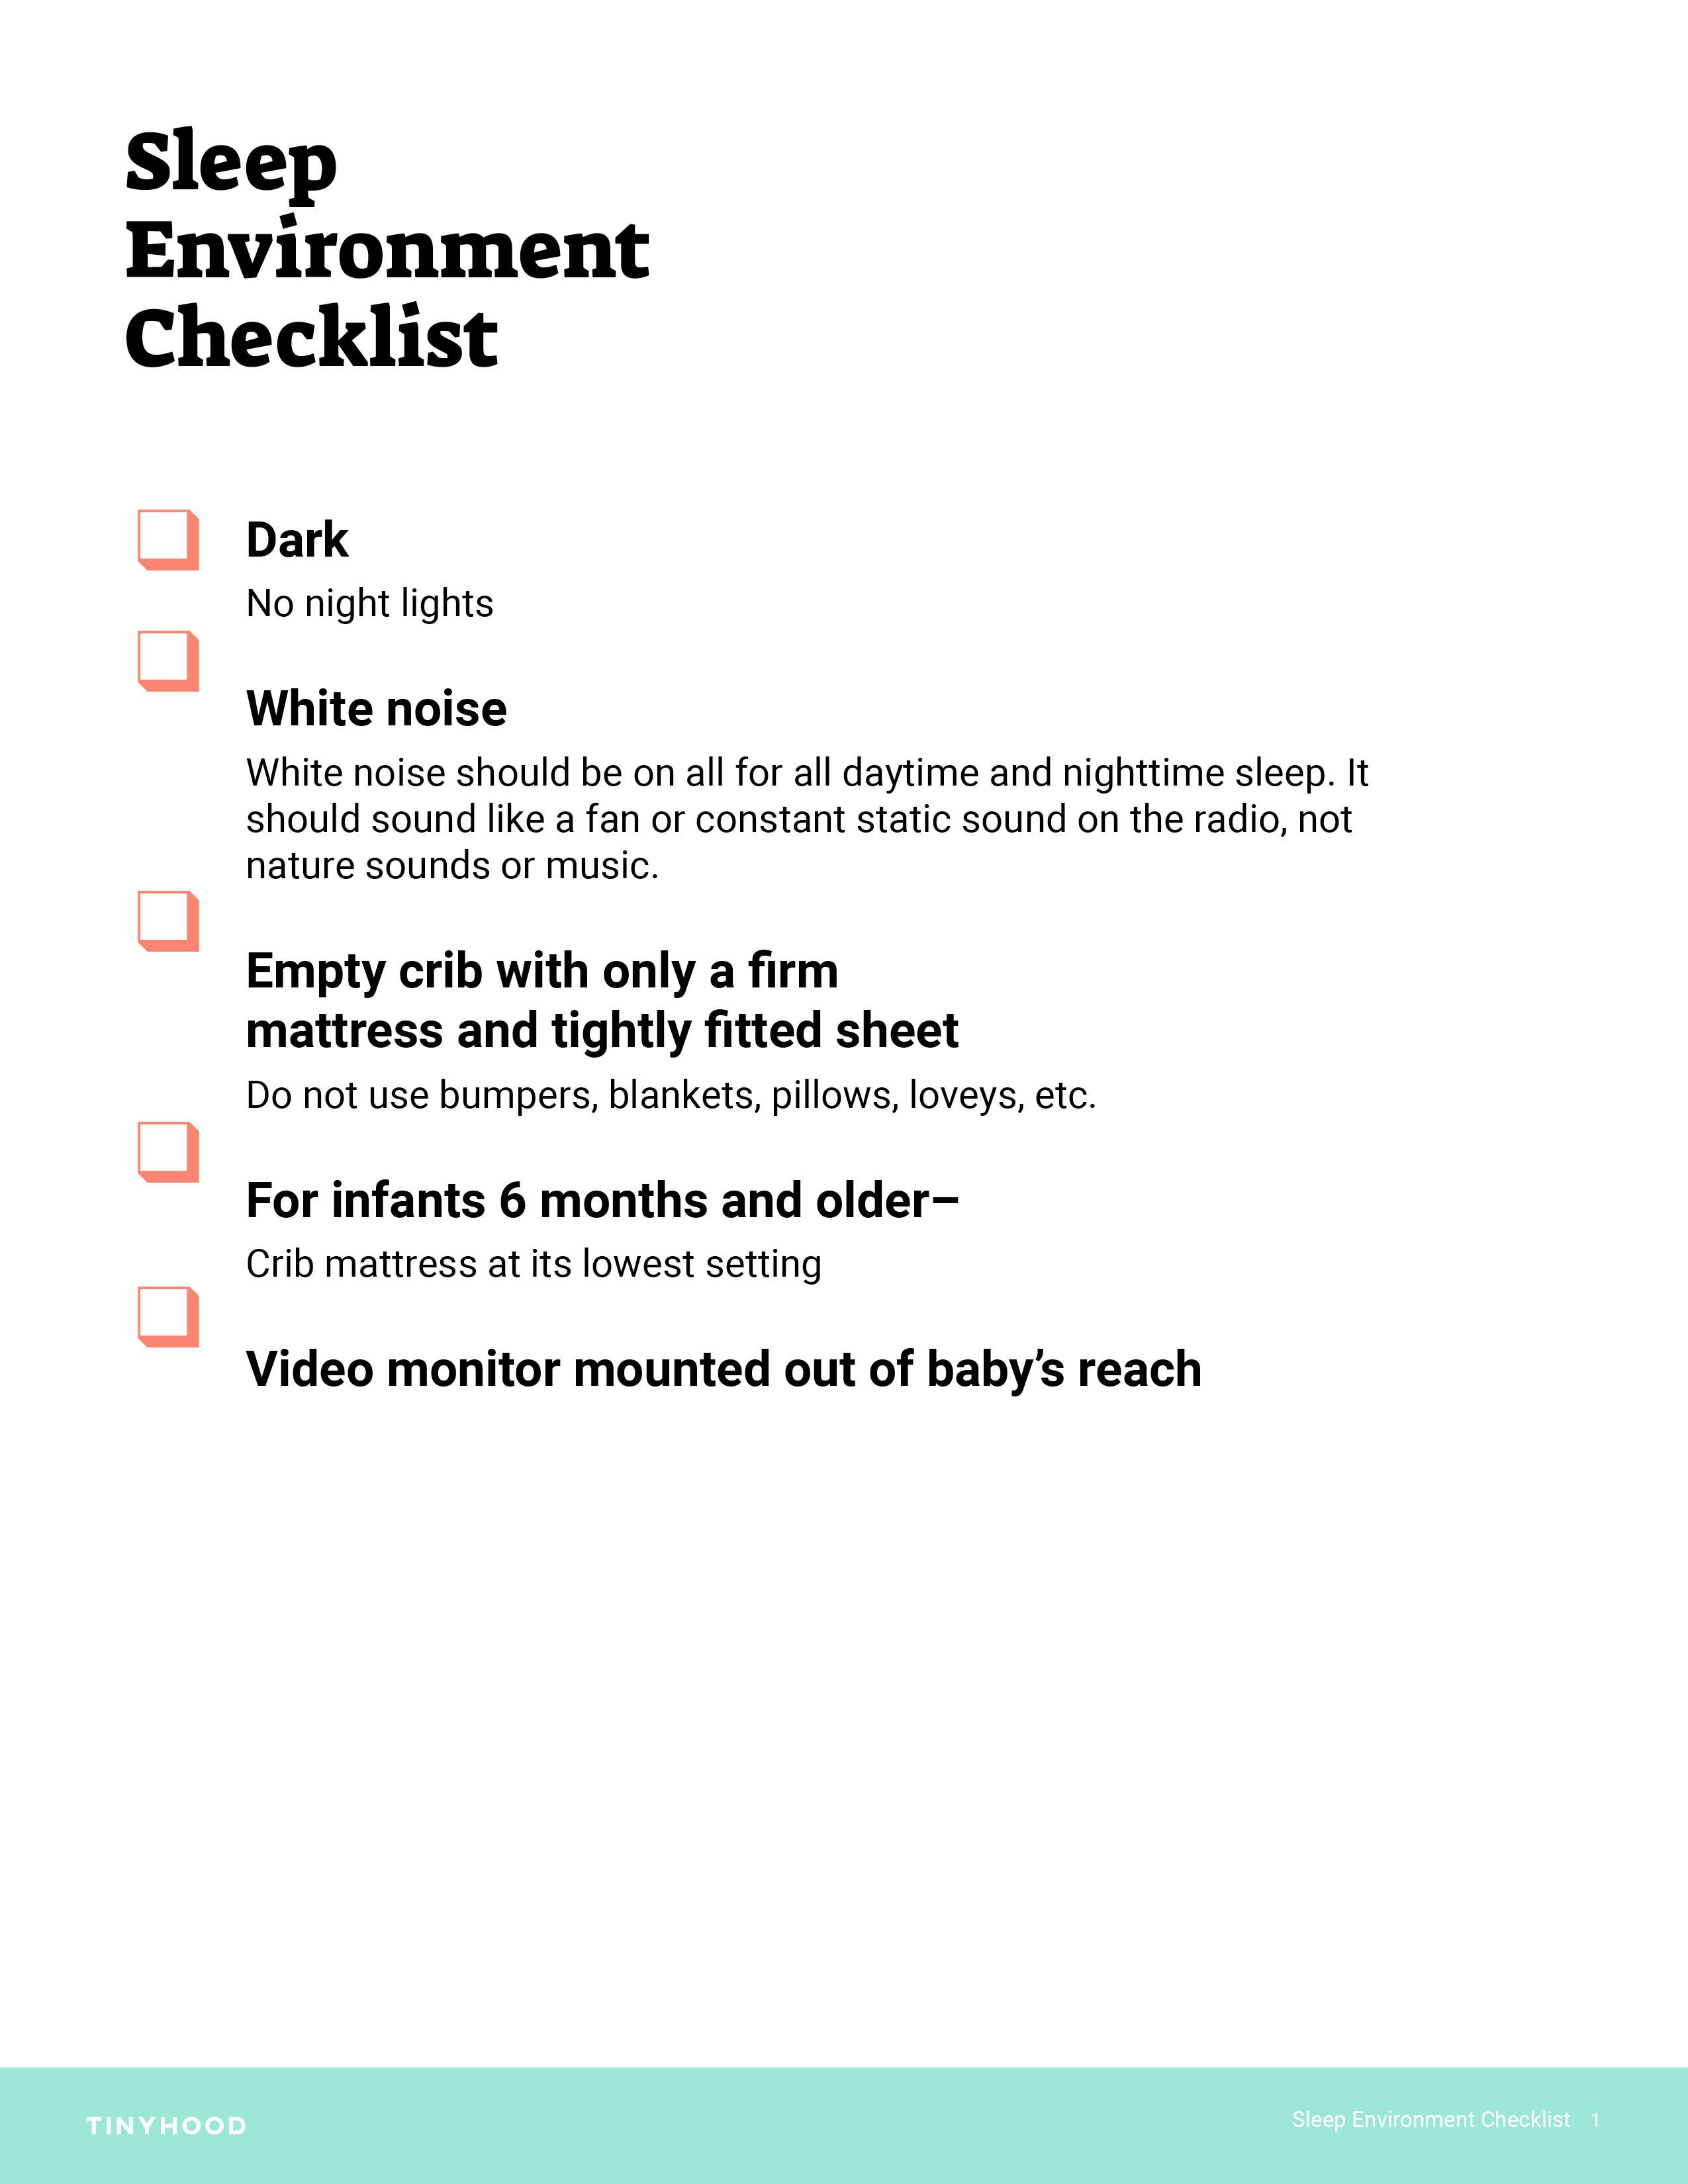 Preview image of Handout: Sleep Environment Checklist